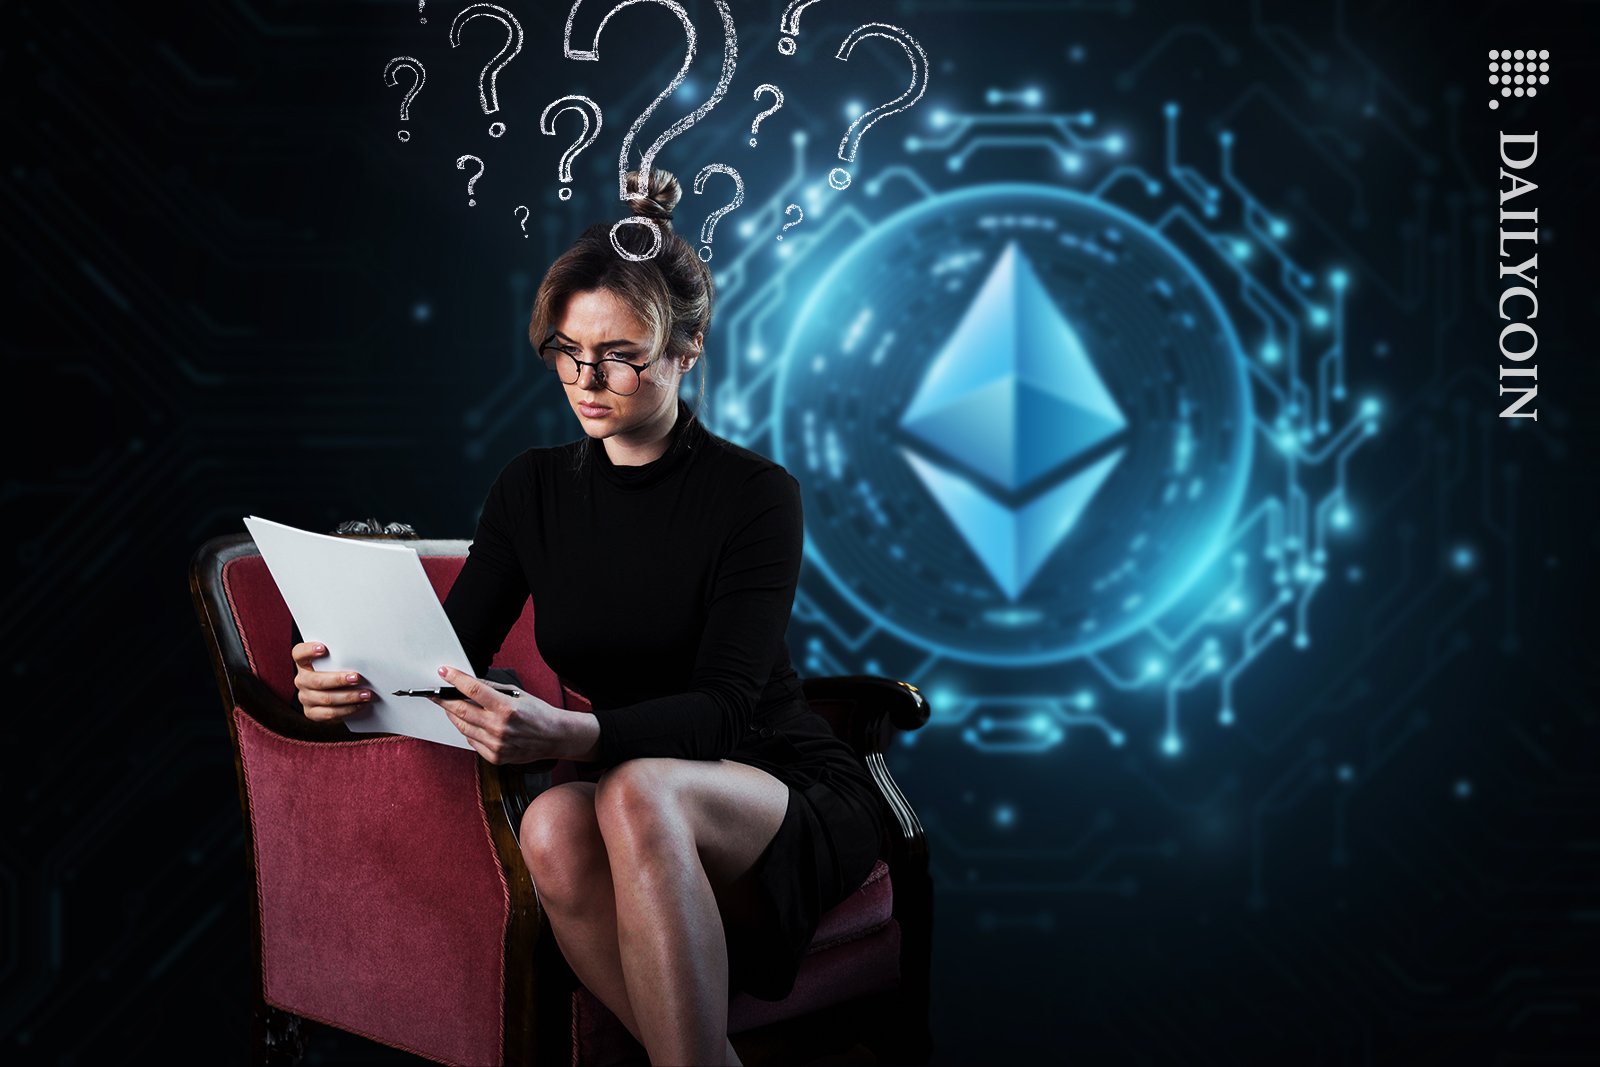 Woman has questions reading ETH documents.